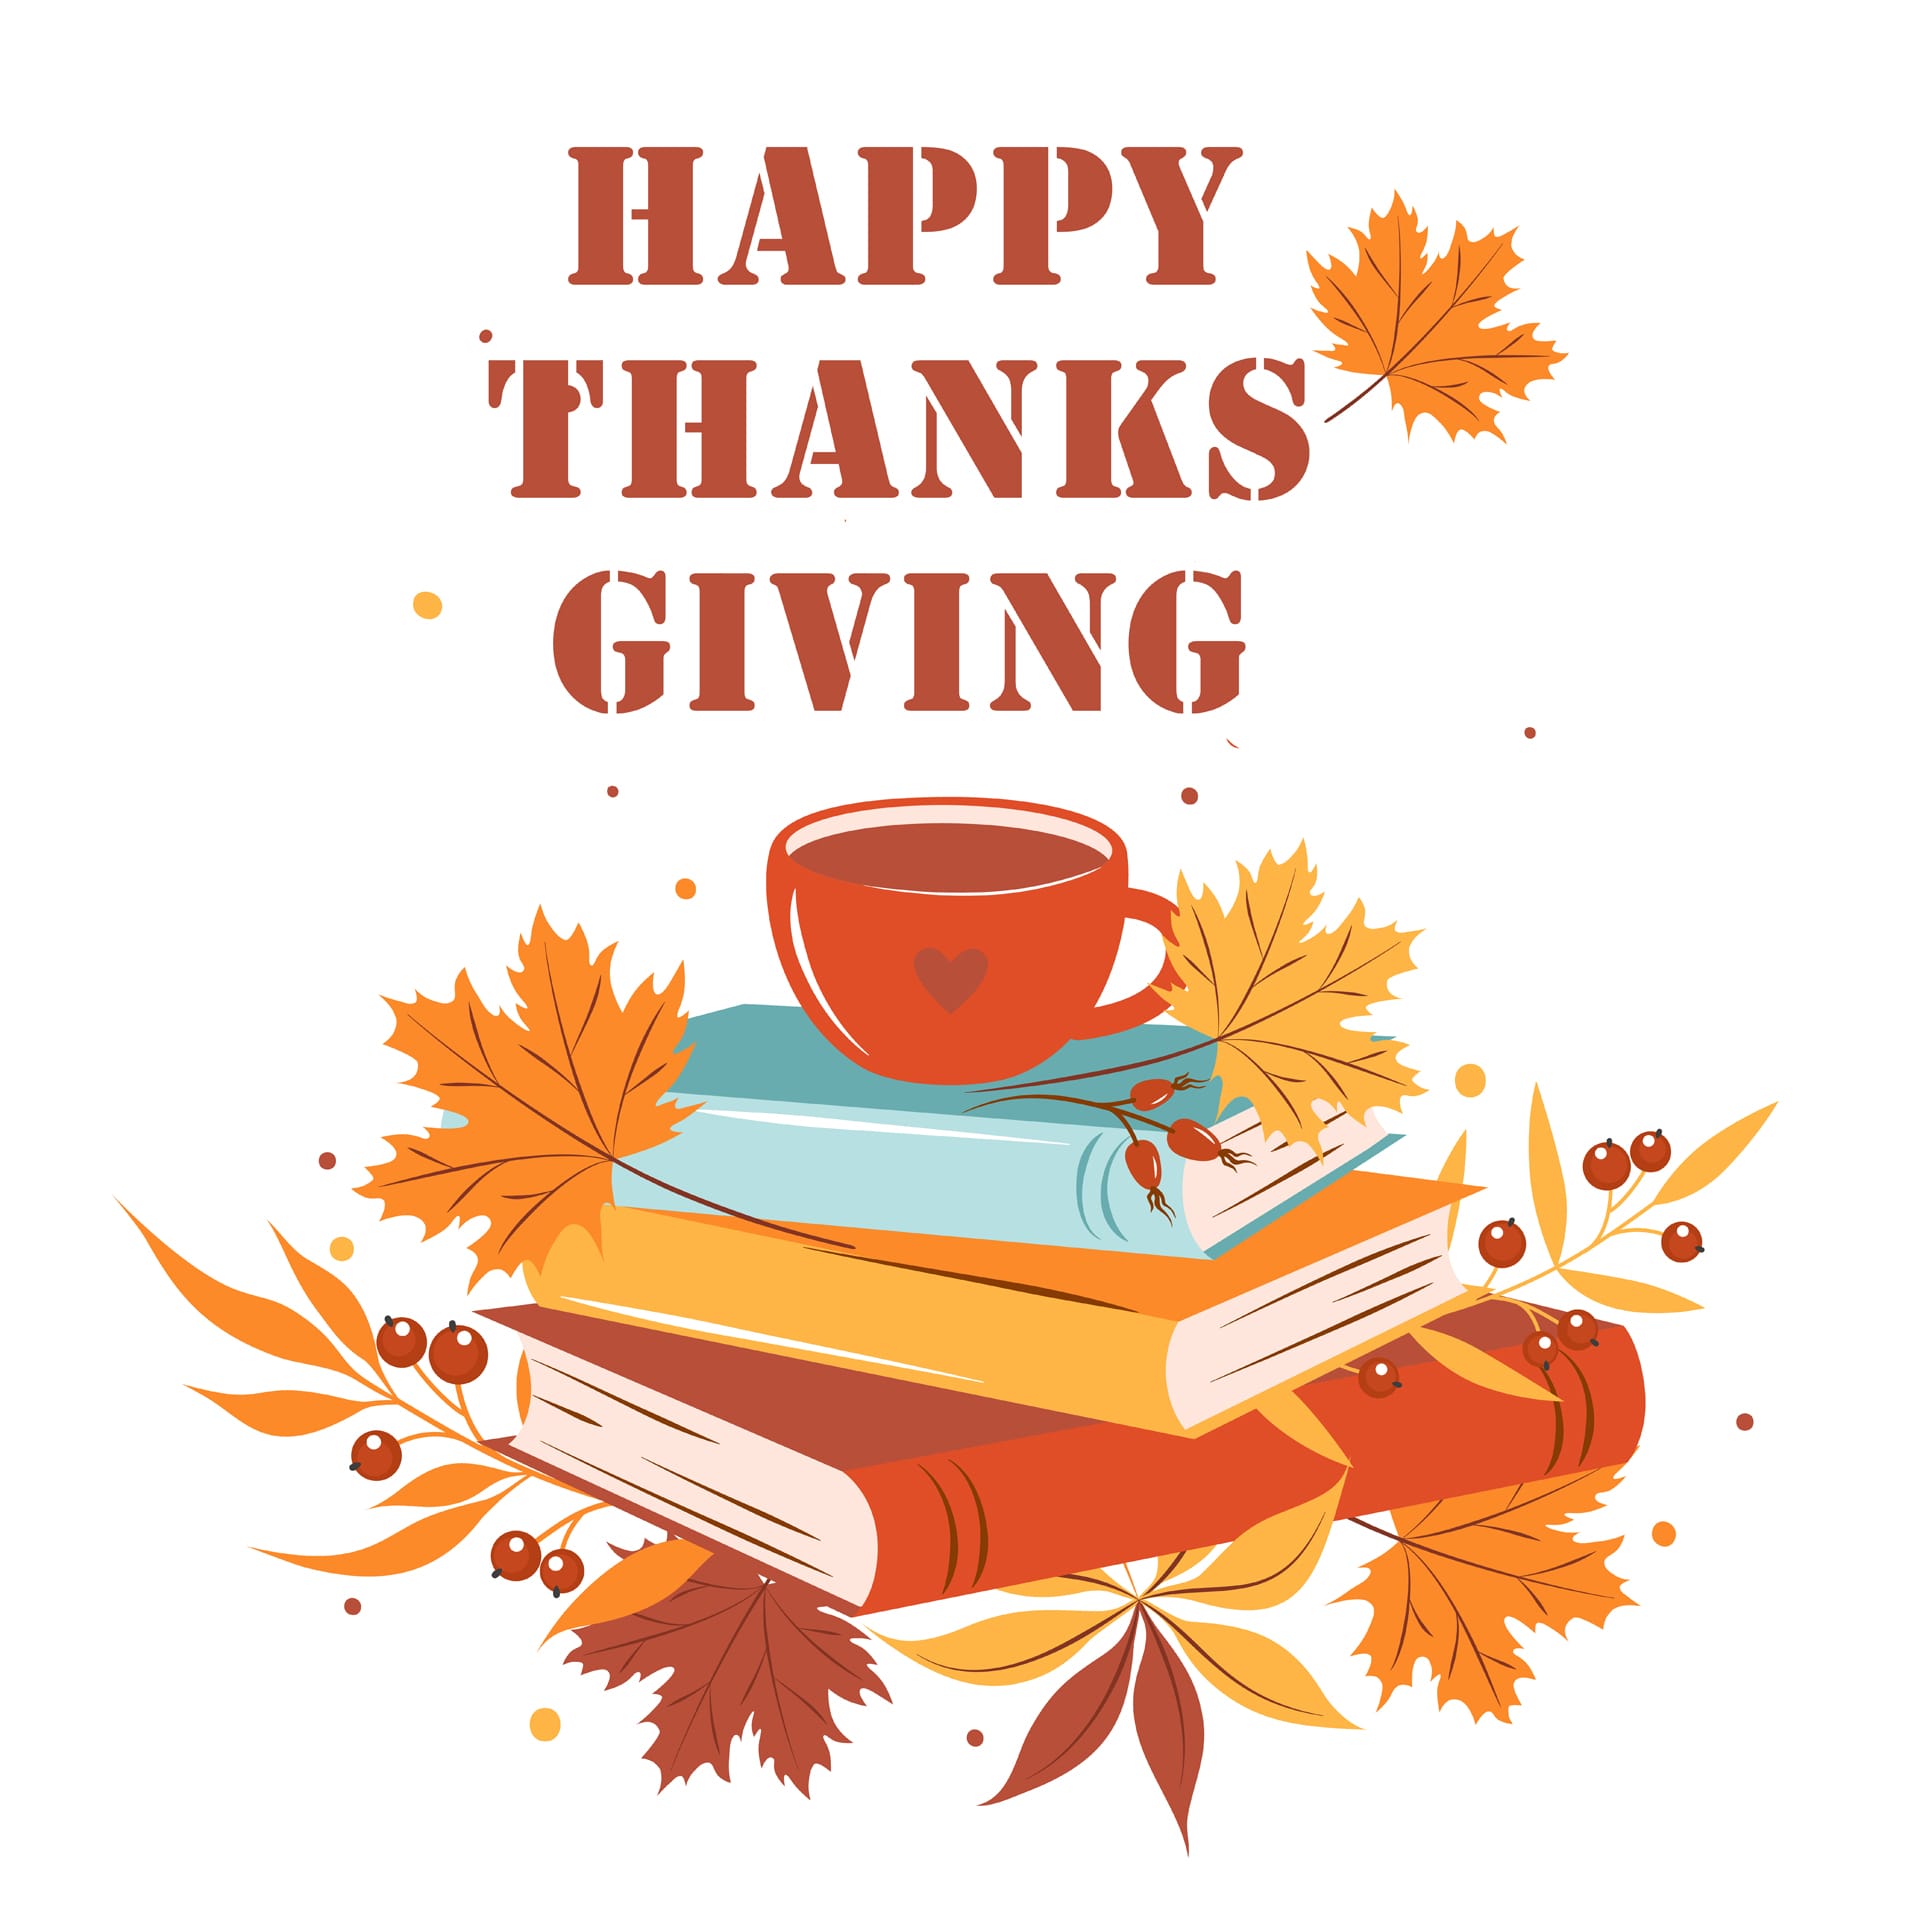 Thanksgiving clipart books cup coffee tea with autumn bright leaves